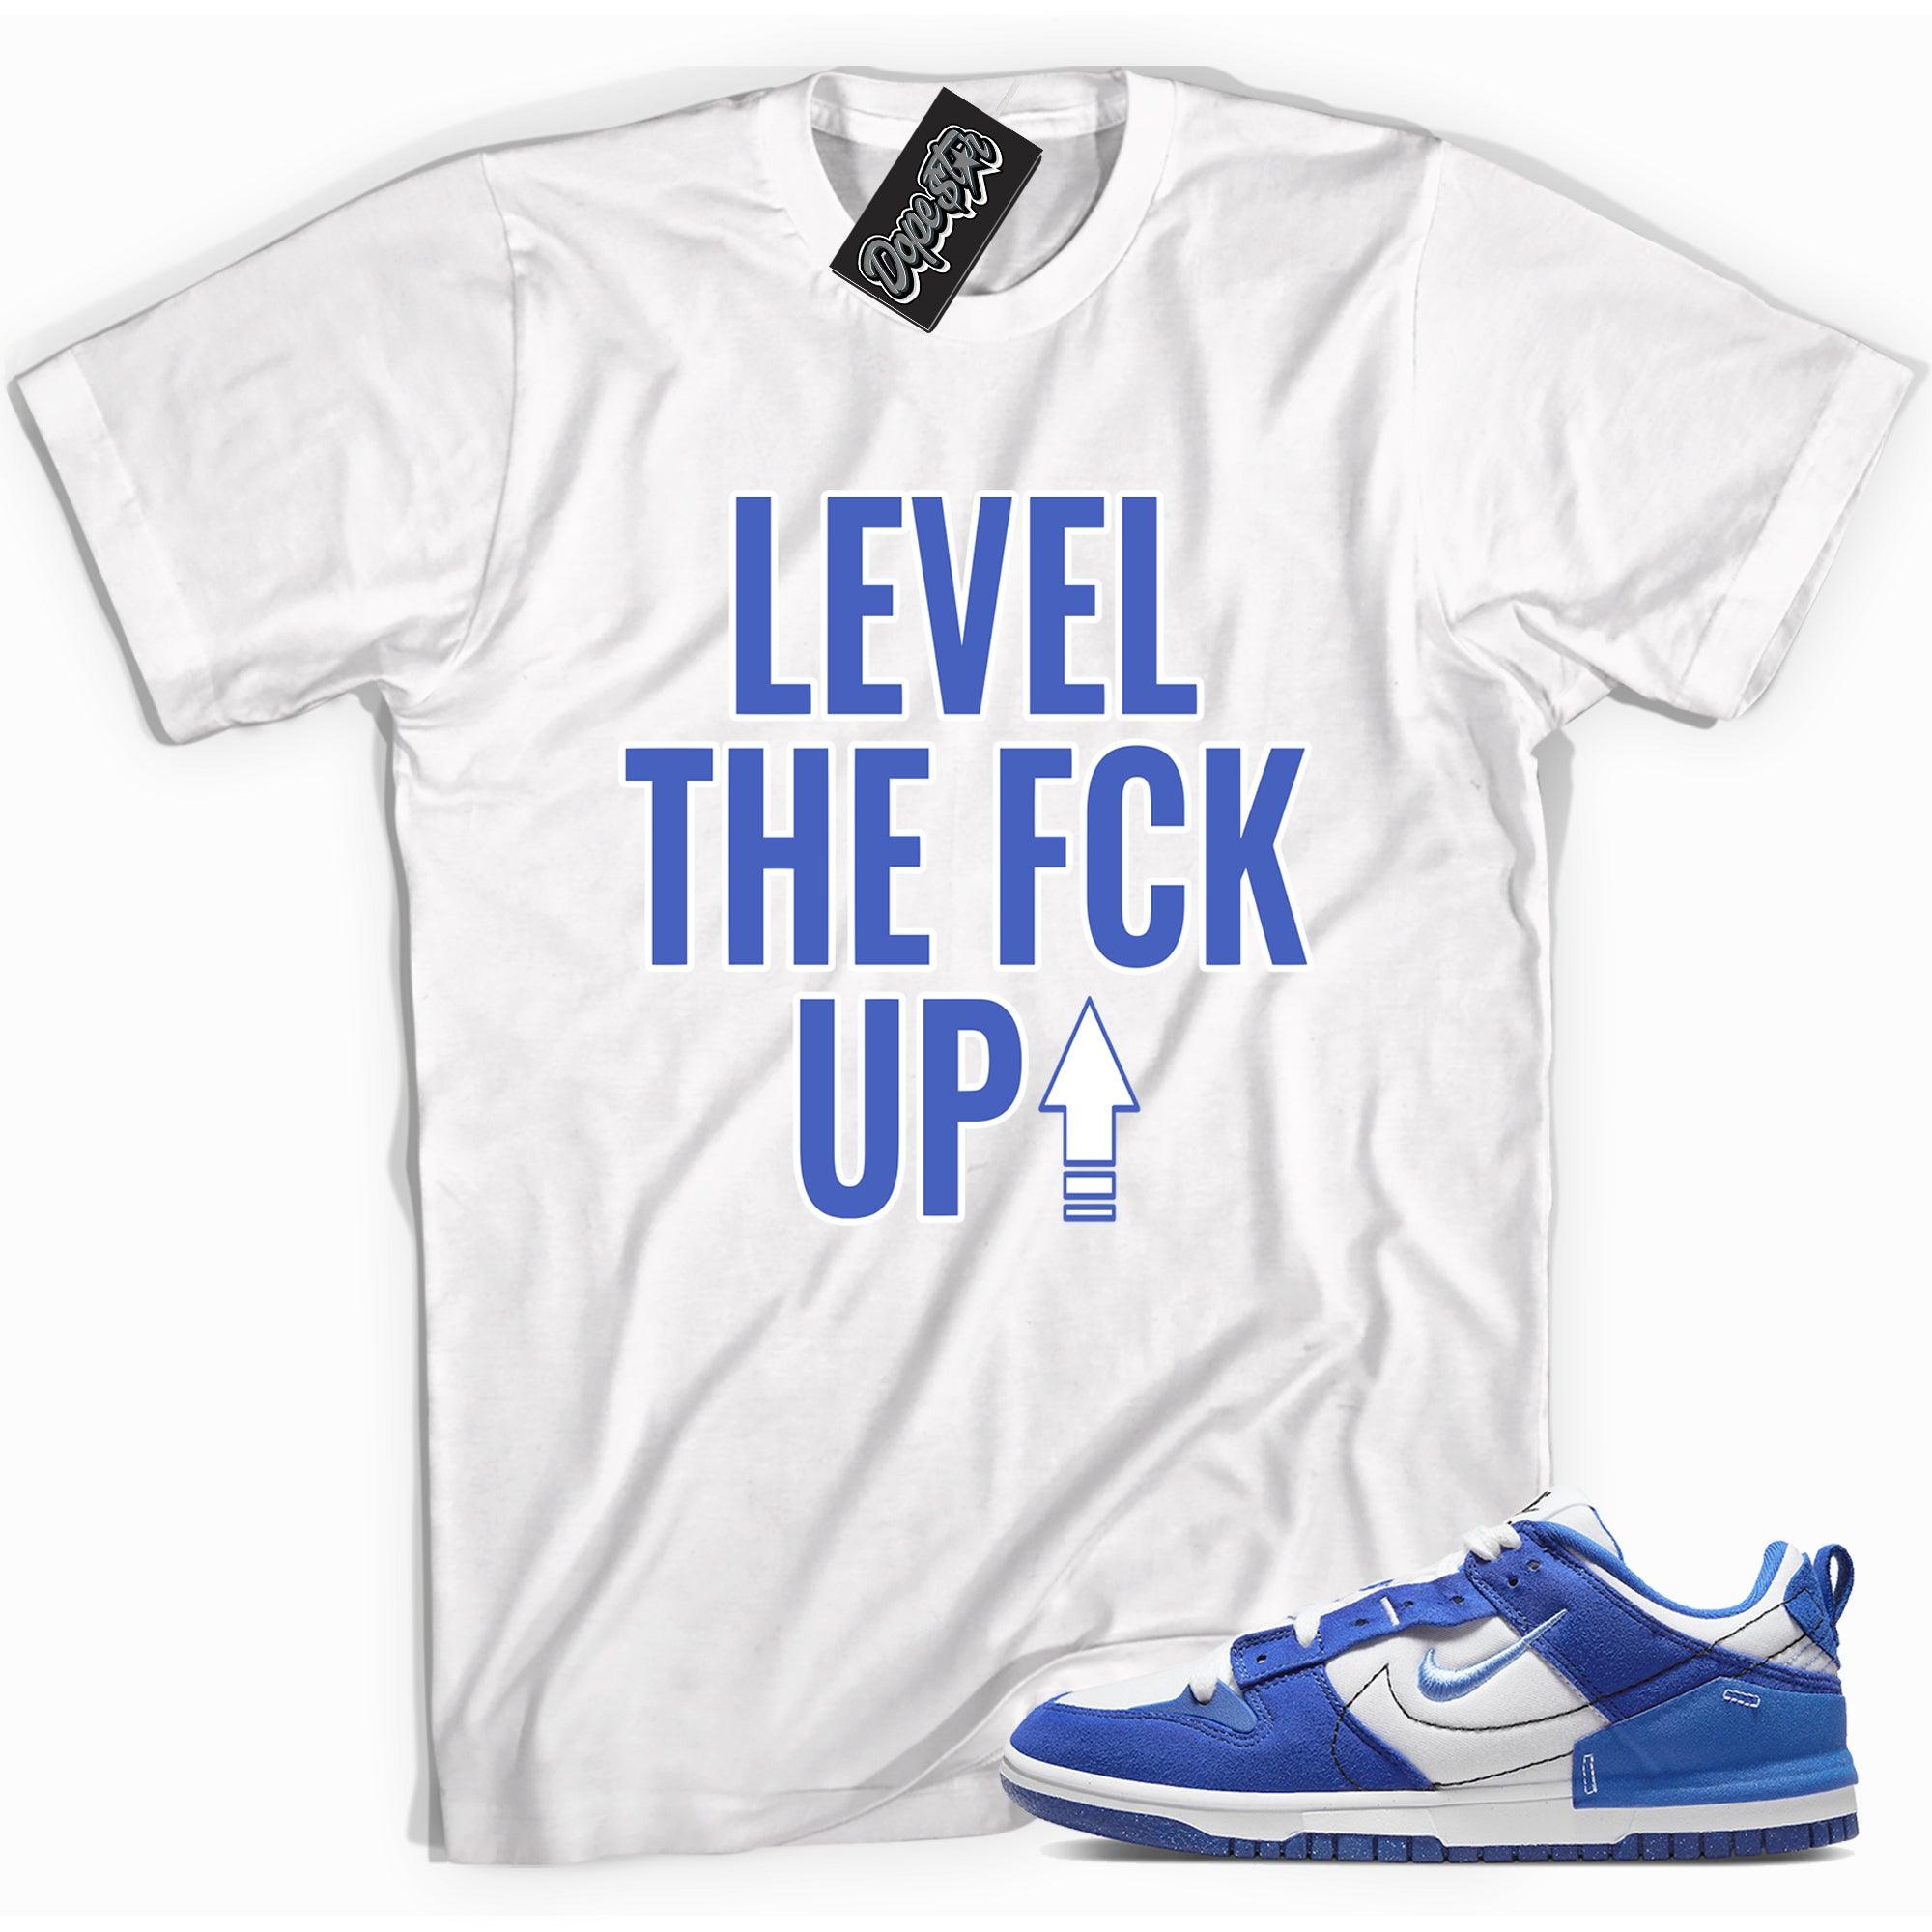 Cool white graphic tee with 'Level Up' print, that perfectly matches Nike Dunk Low Disrupt 2 Hyper Royal sneakers.